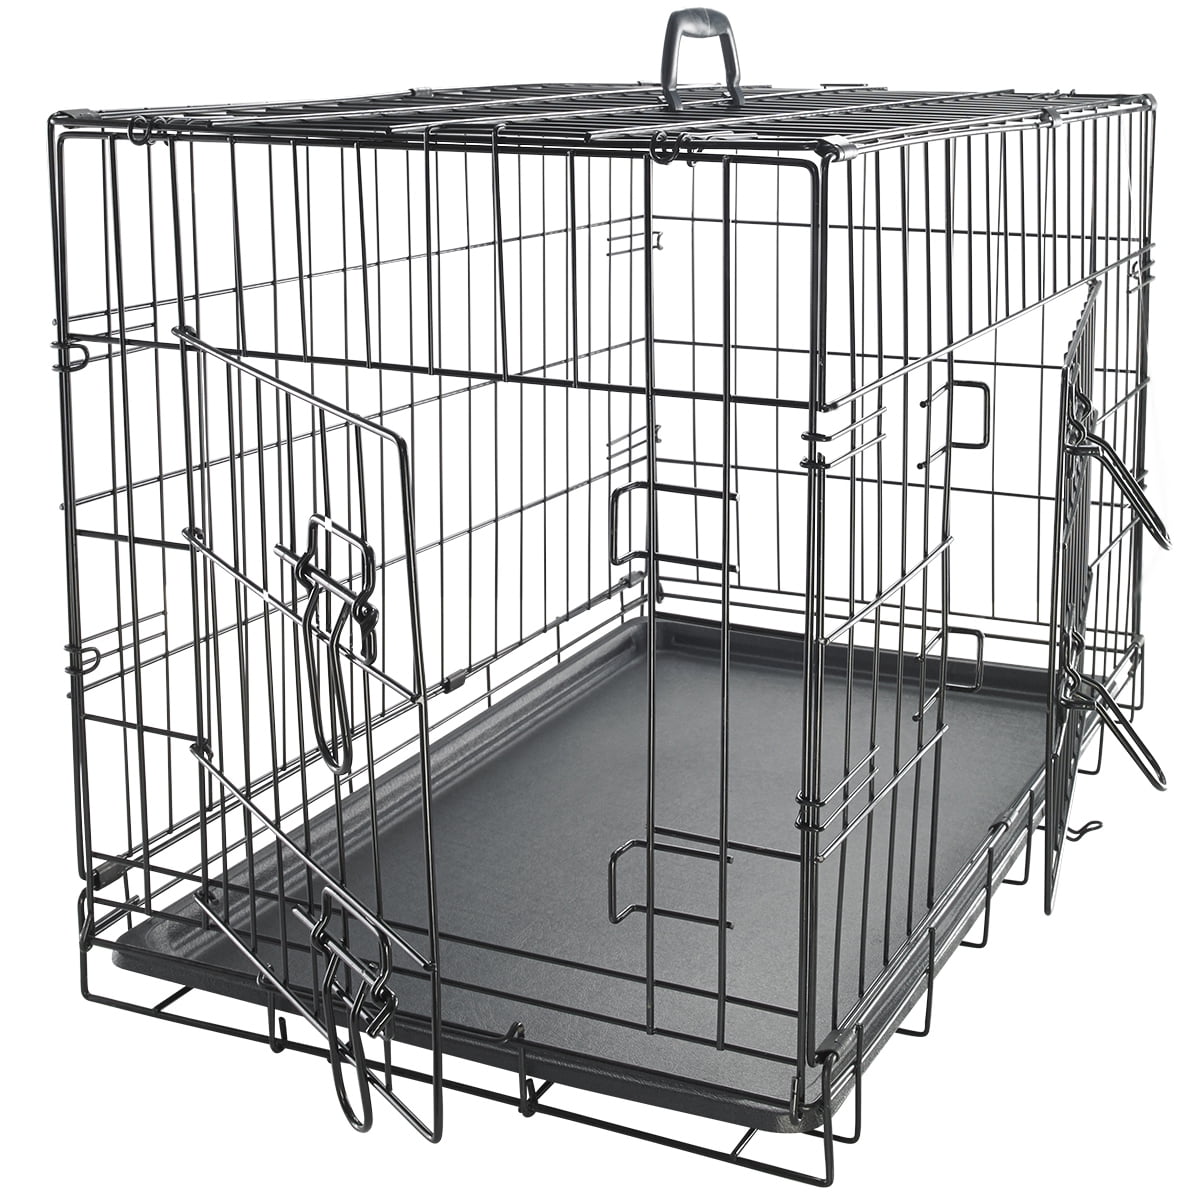 collapsible metal dog crate